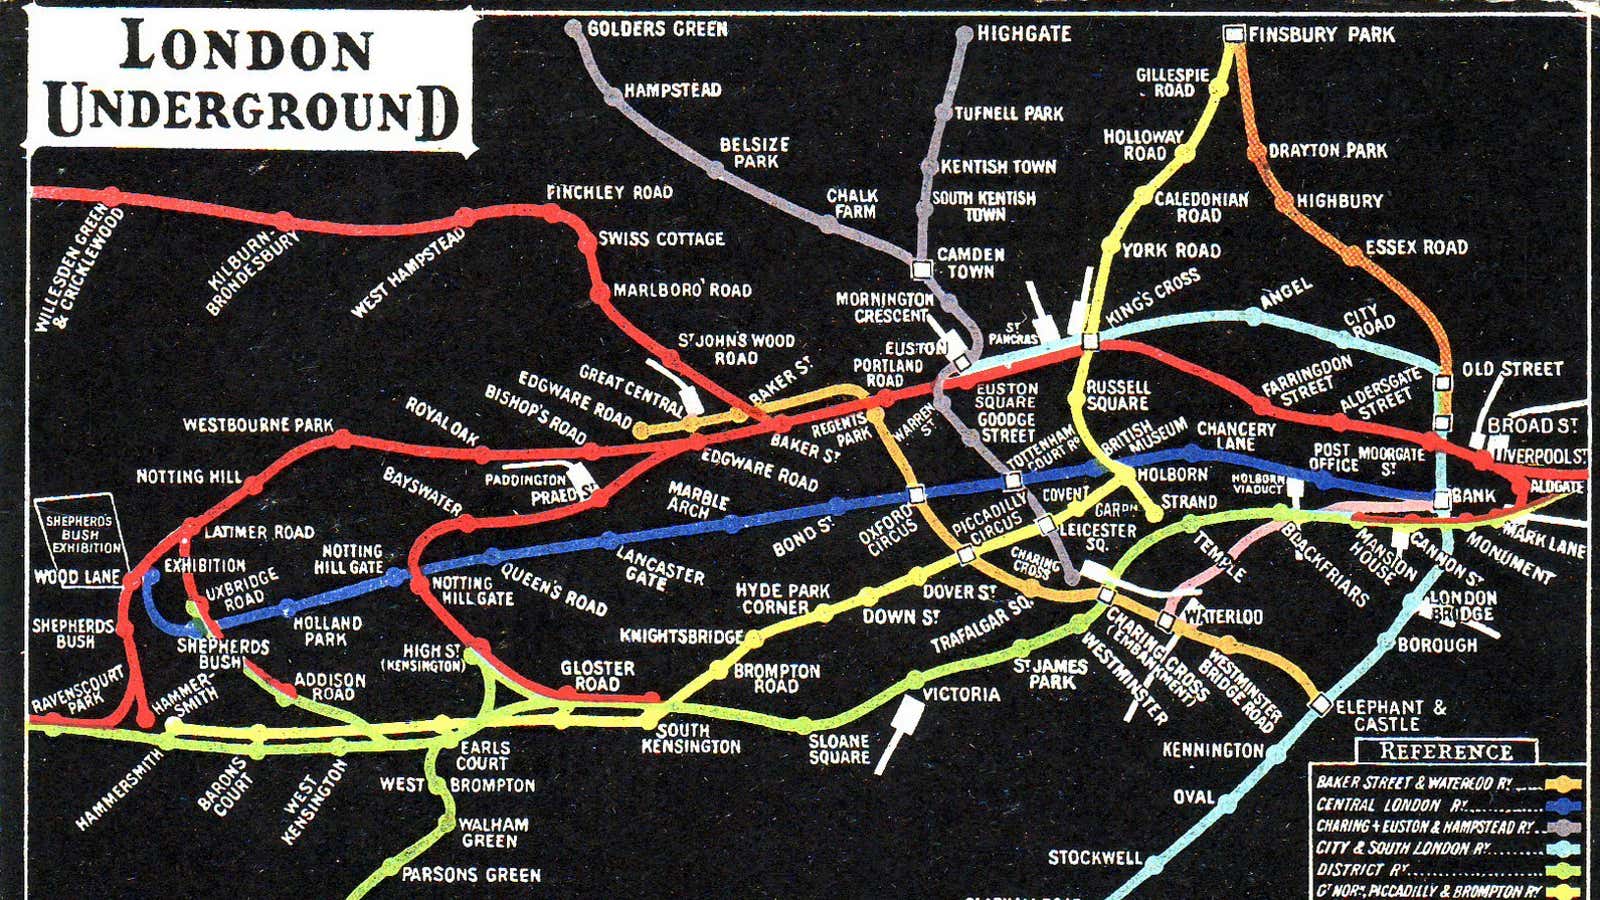 A postcard version of the tube map in 1908